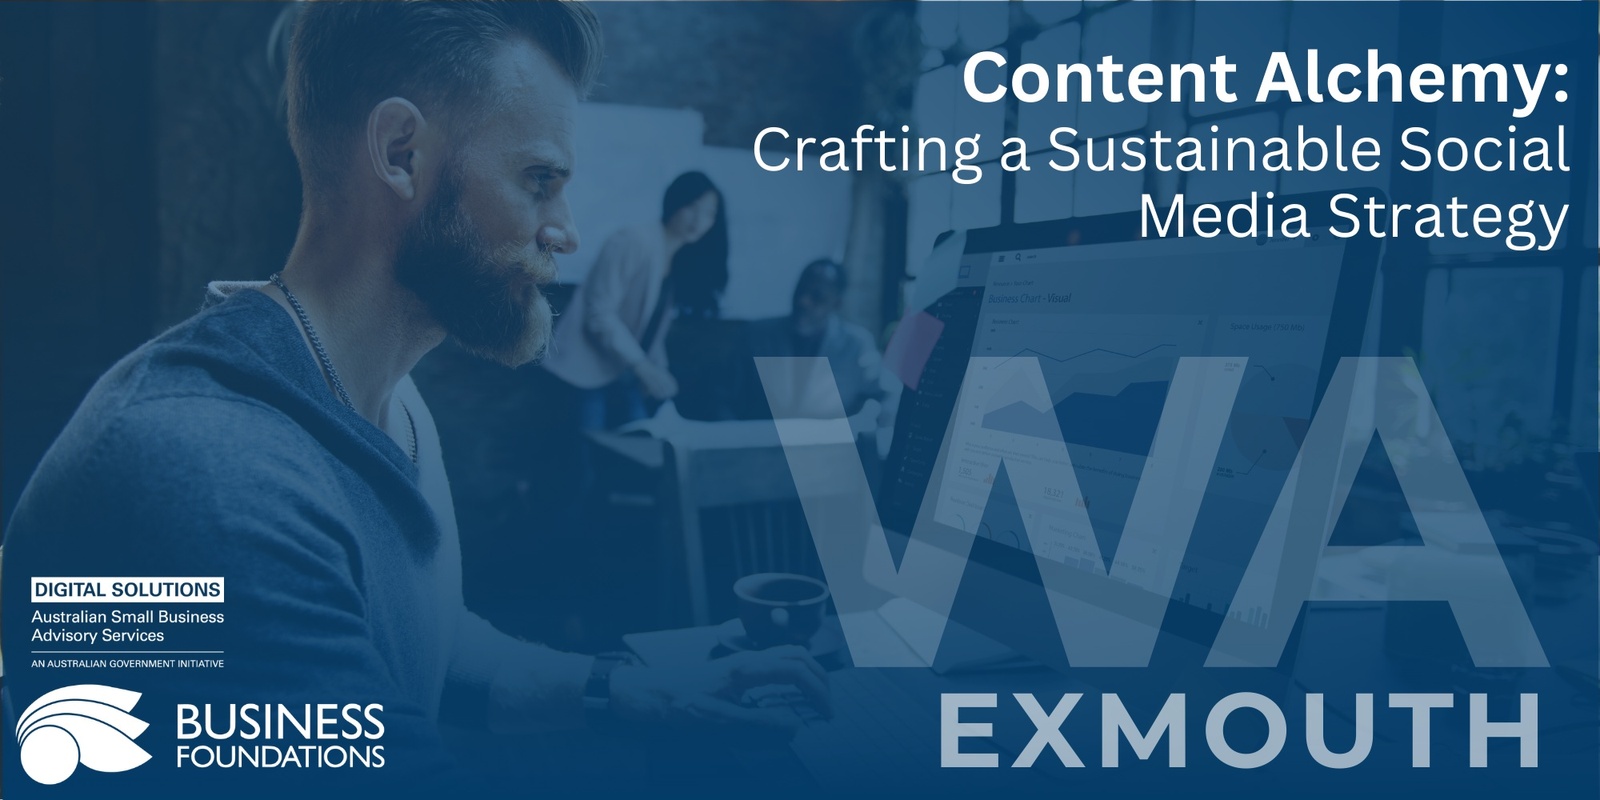 Banner image for Content Alchemy: Crafting a Sustainable Social Media Strategy - Exmouth